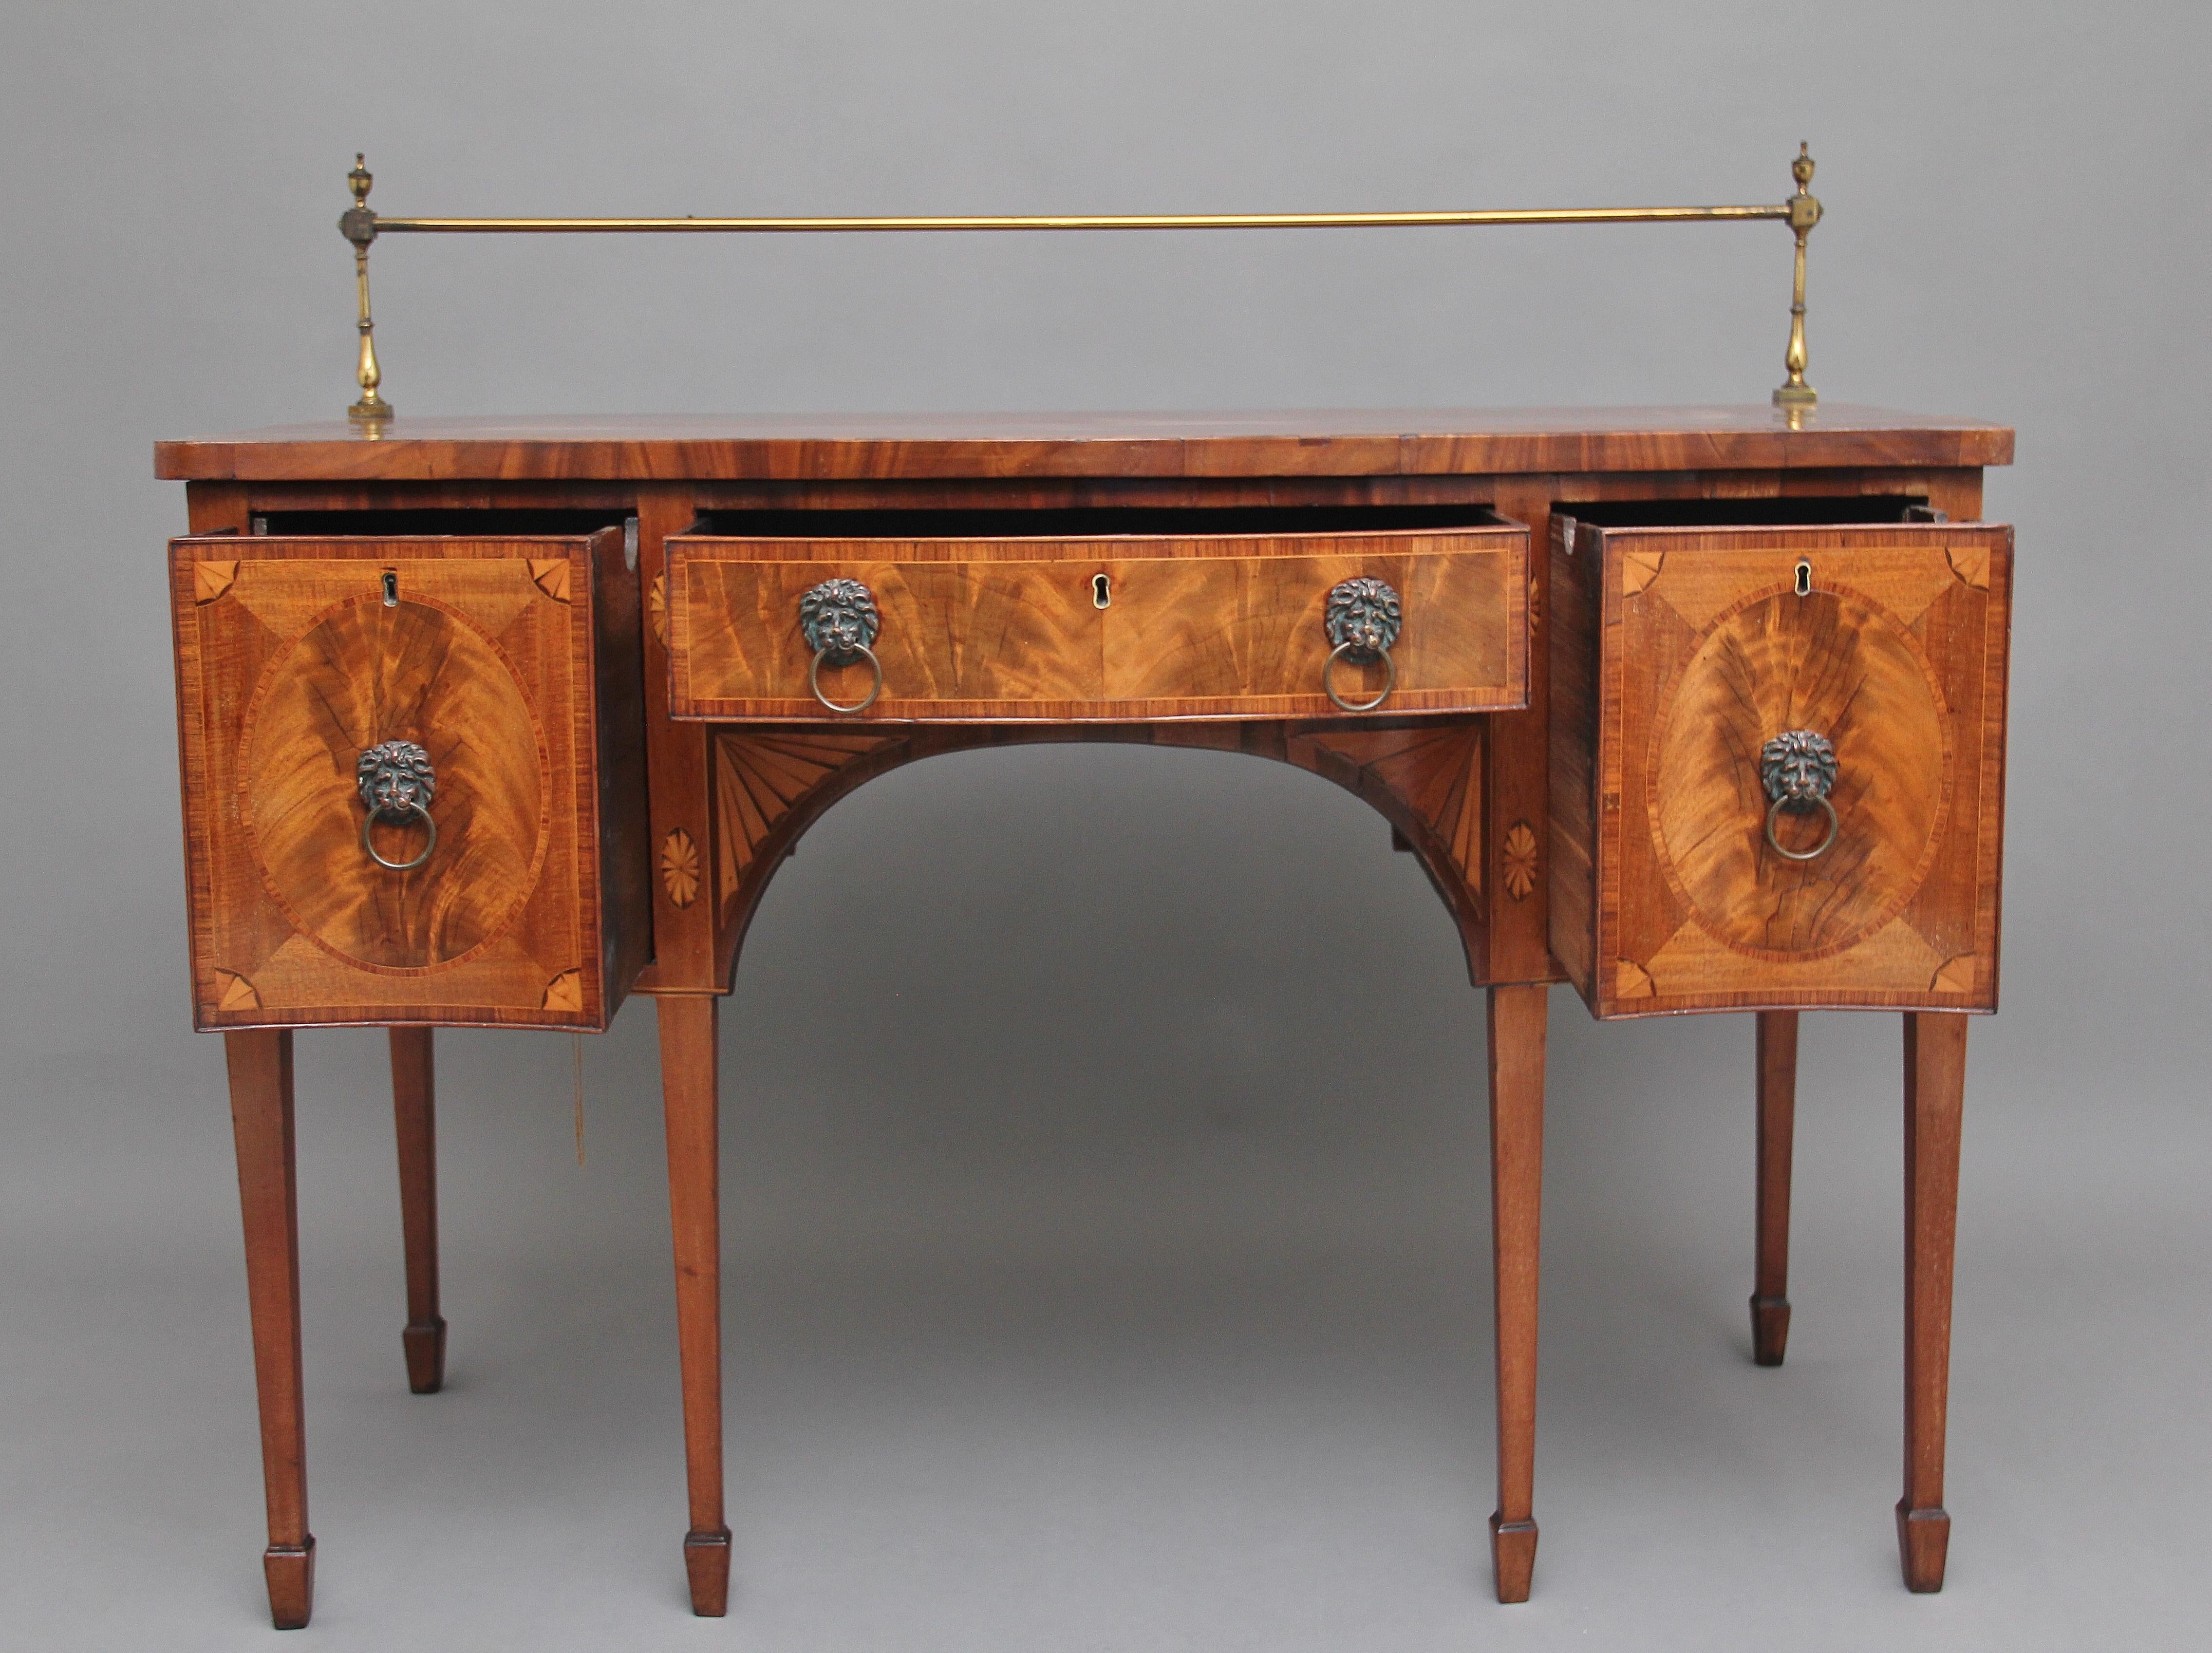 A superb quality early 19th century mahogany inlaid serpentine sideboard, having a crossbanded top with a brass gallery at the back, having a central drawer and two deep drawers either side, all drawers are oak lined and have the original lion mask